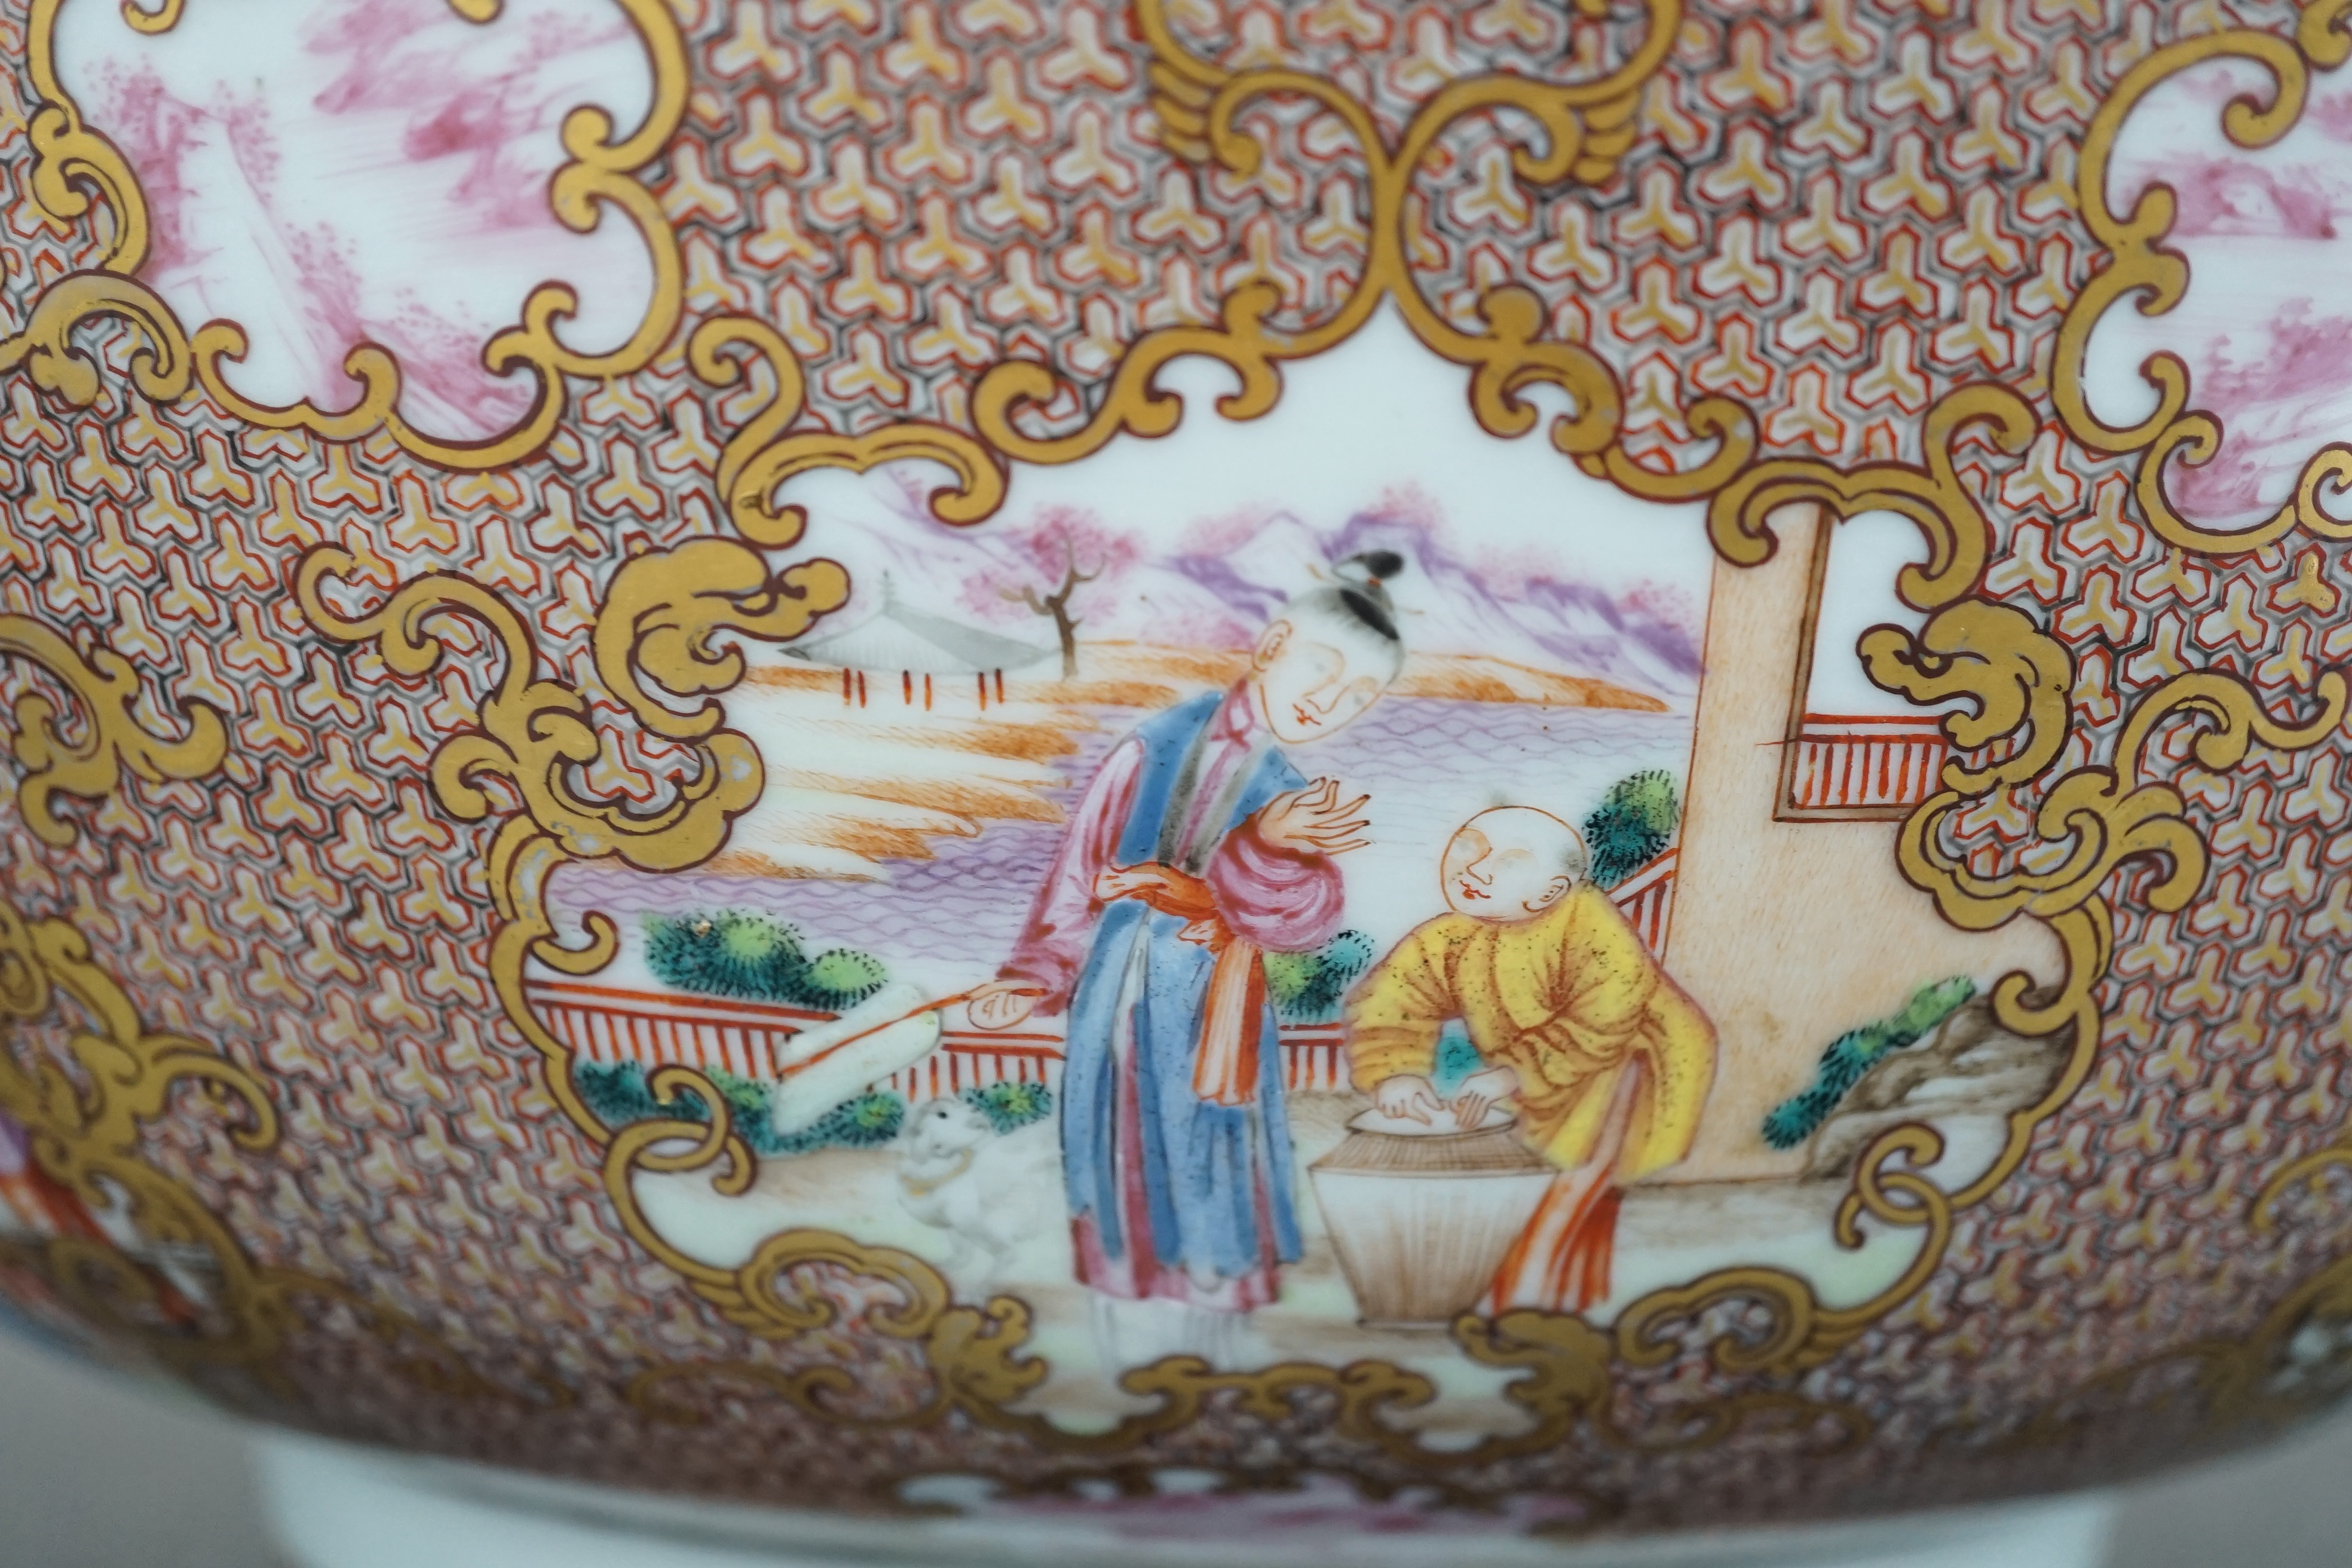 A large Chinese famille rose punch bowl, Qianlong period